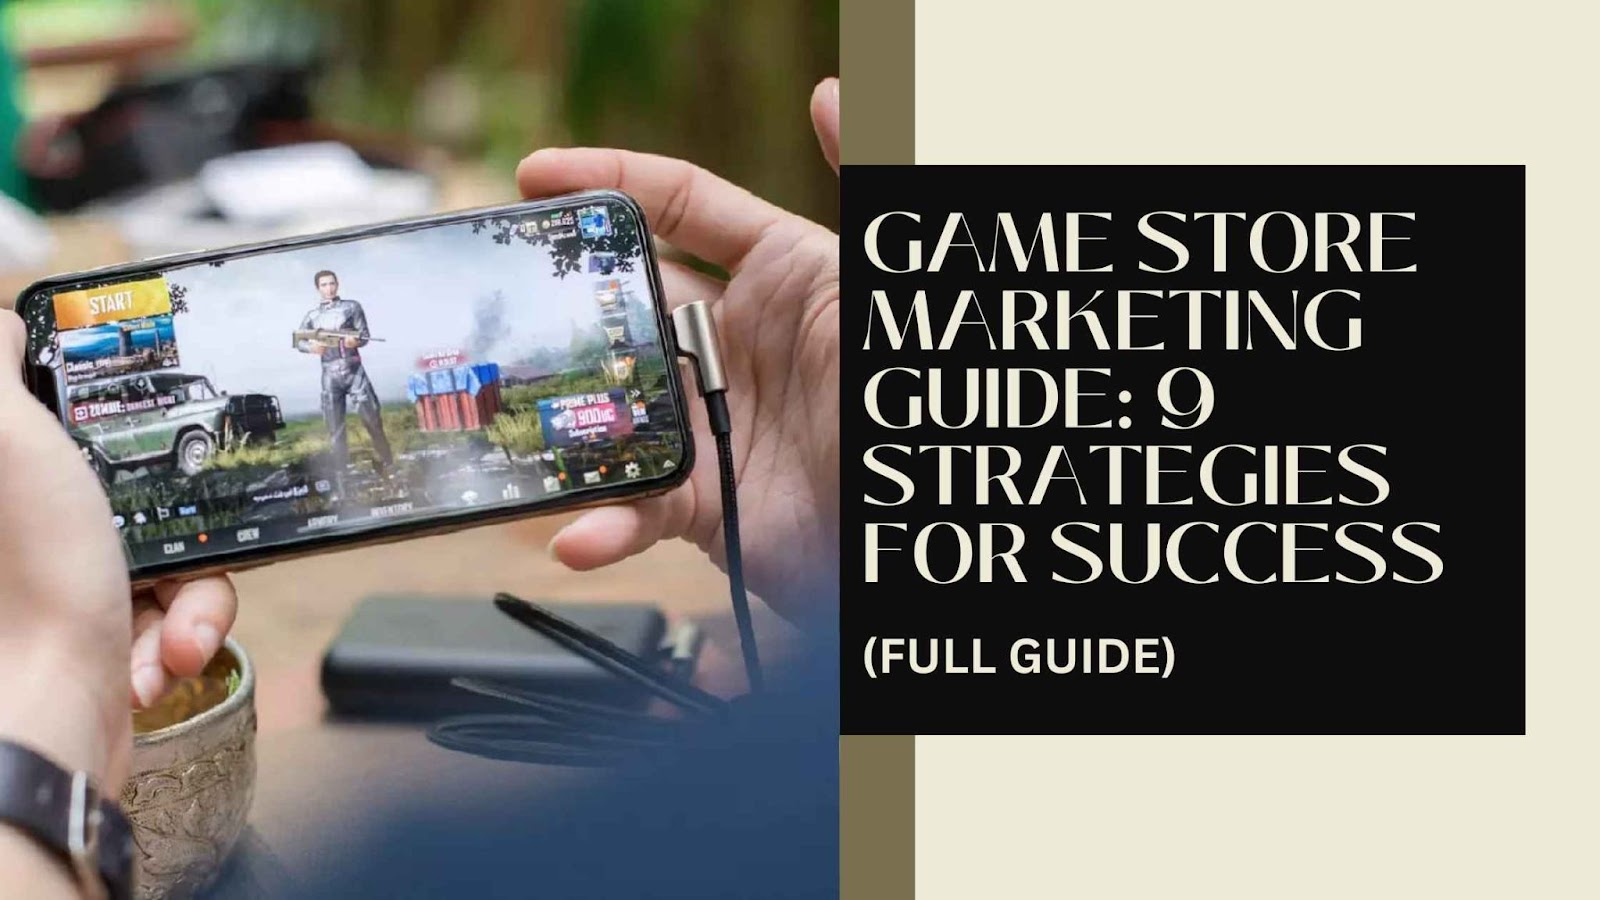 Game Store Marketing Guide: 9 Strategies for Success